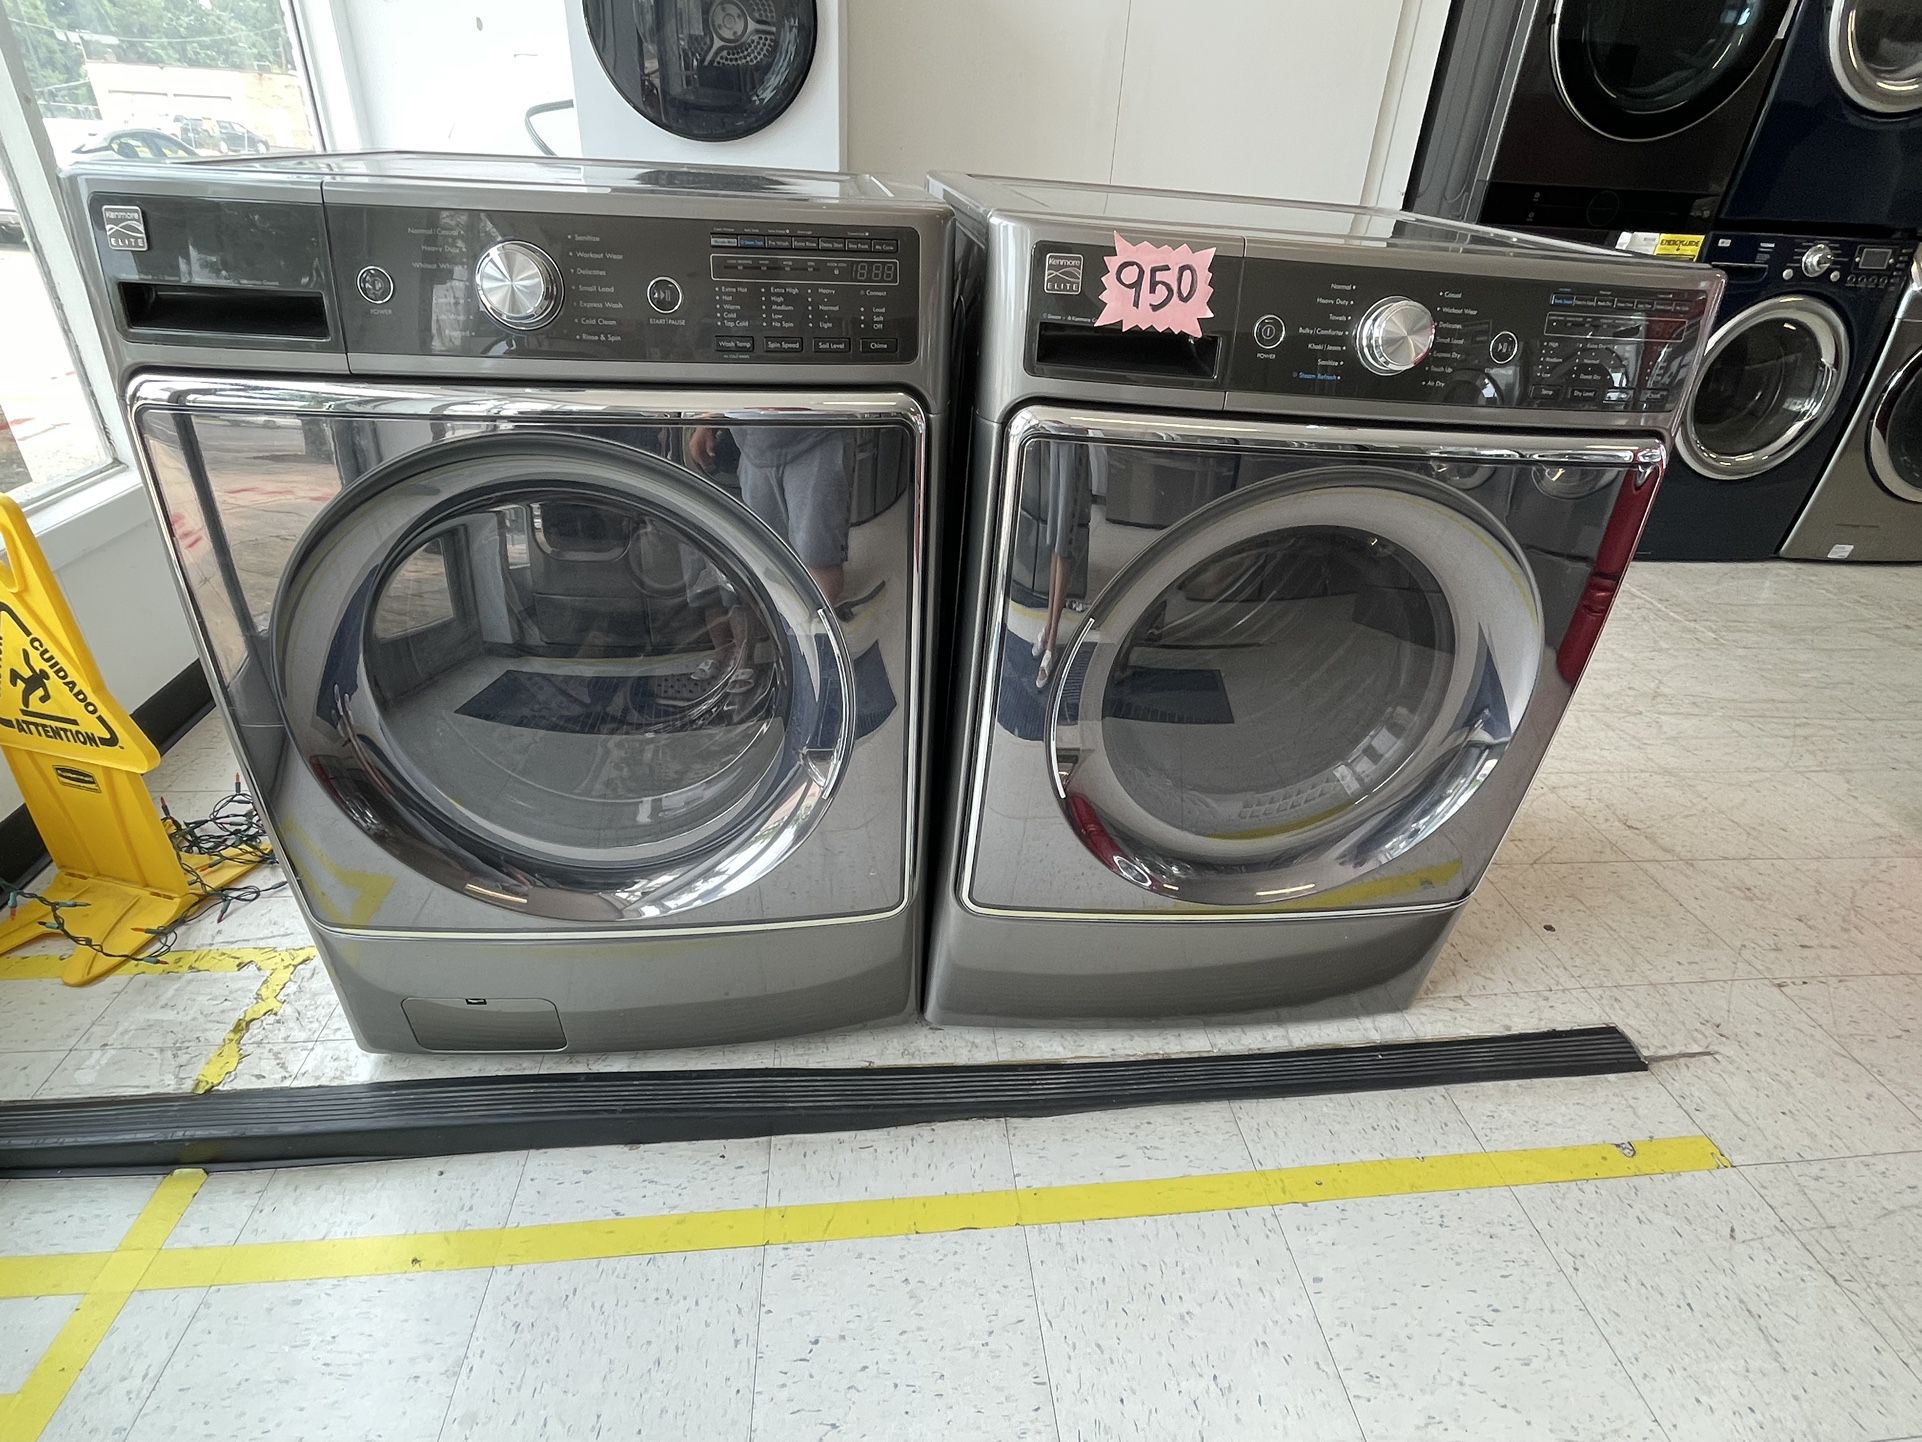 Kenmore 29in Front Load Washer And Electric Dryer Set Used In Good Condition With 90days Warranty 